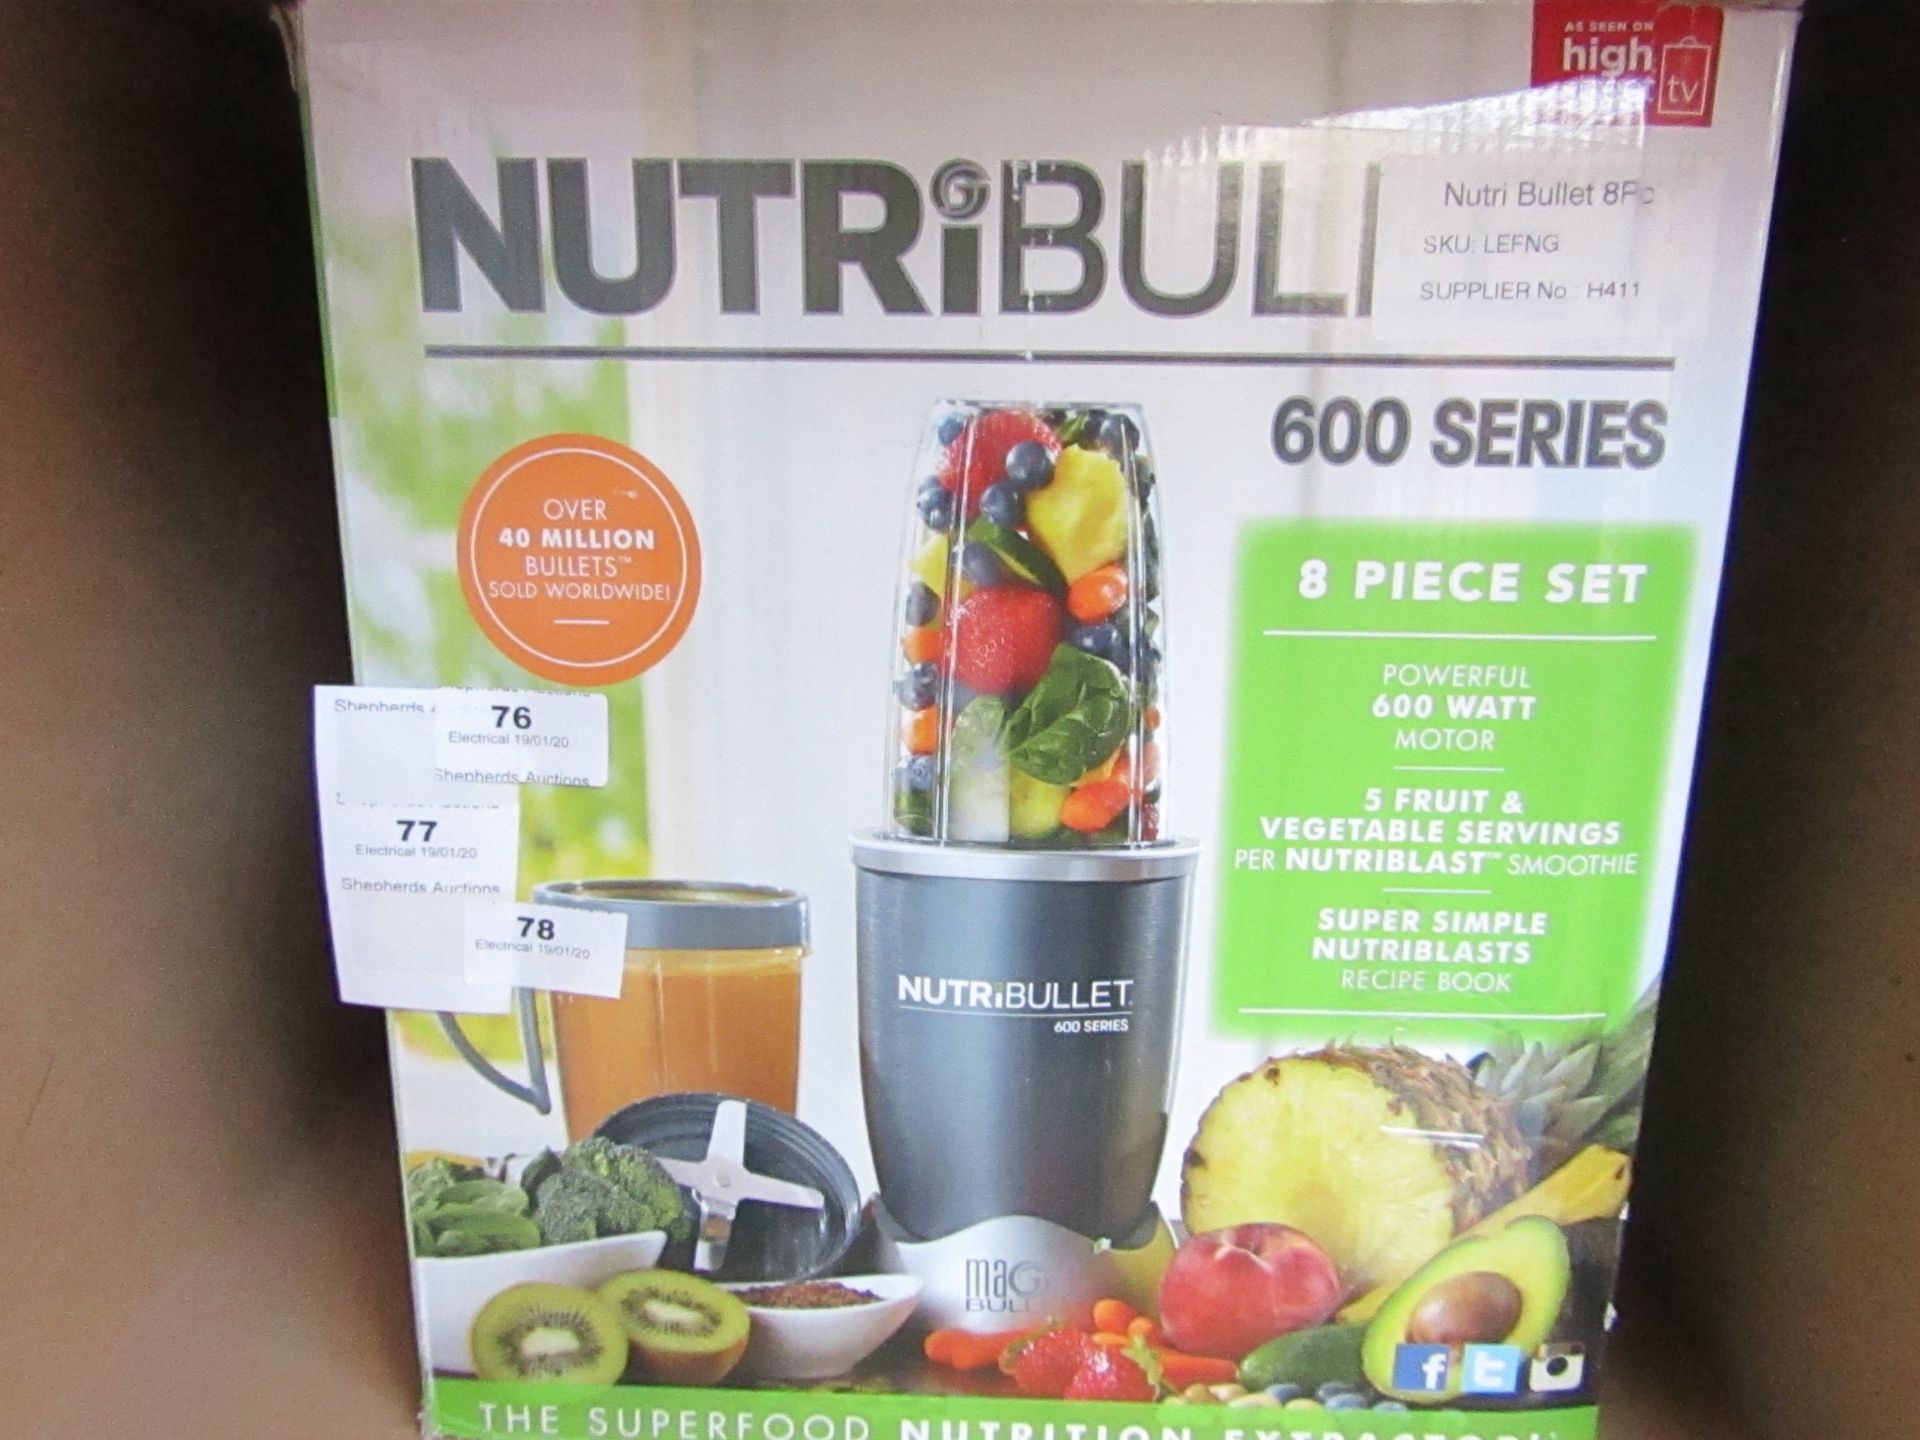 | 1x | nutribullet 600 series | unchecked and boxed | no online re-sale | Sku C5060191467346 |